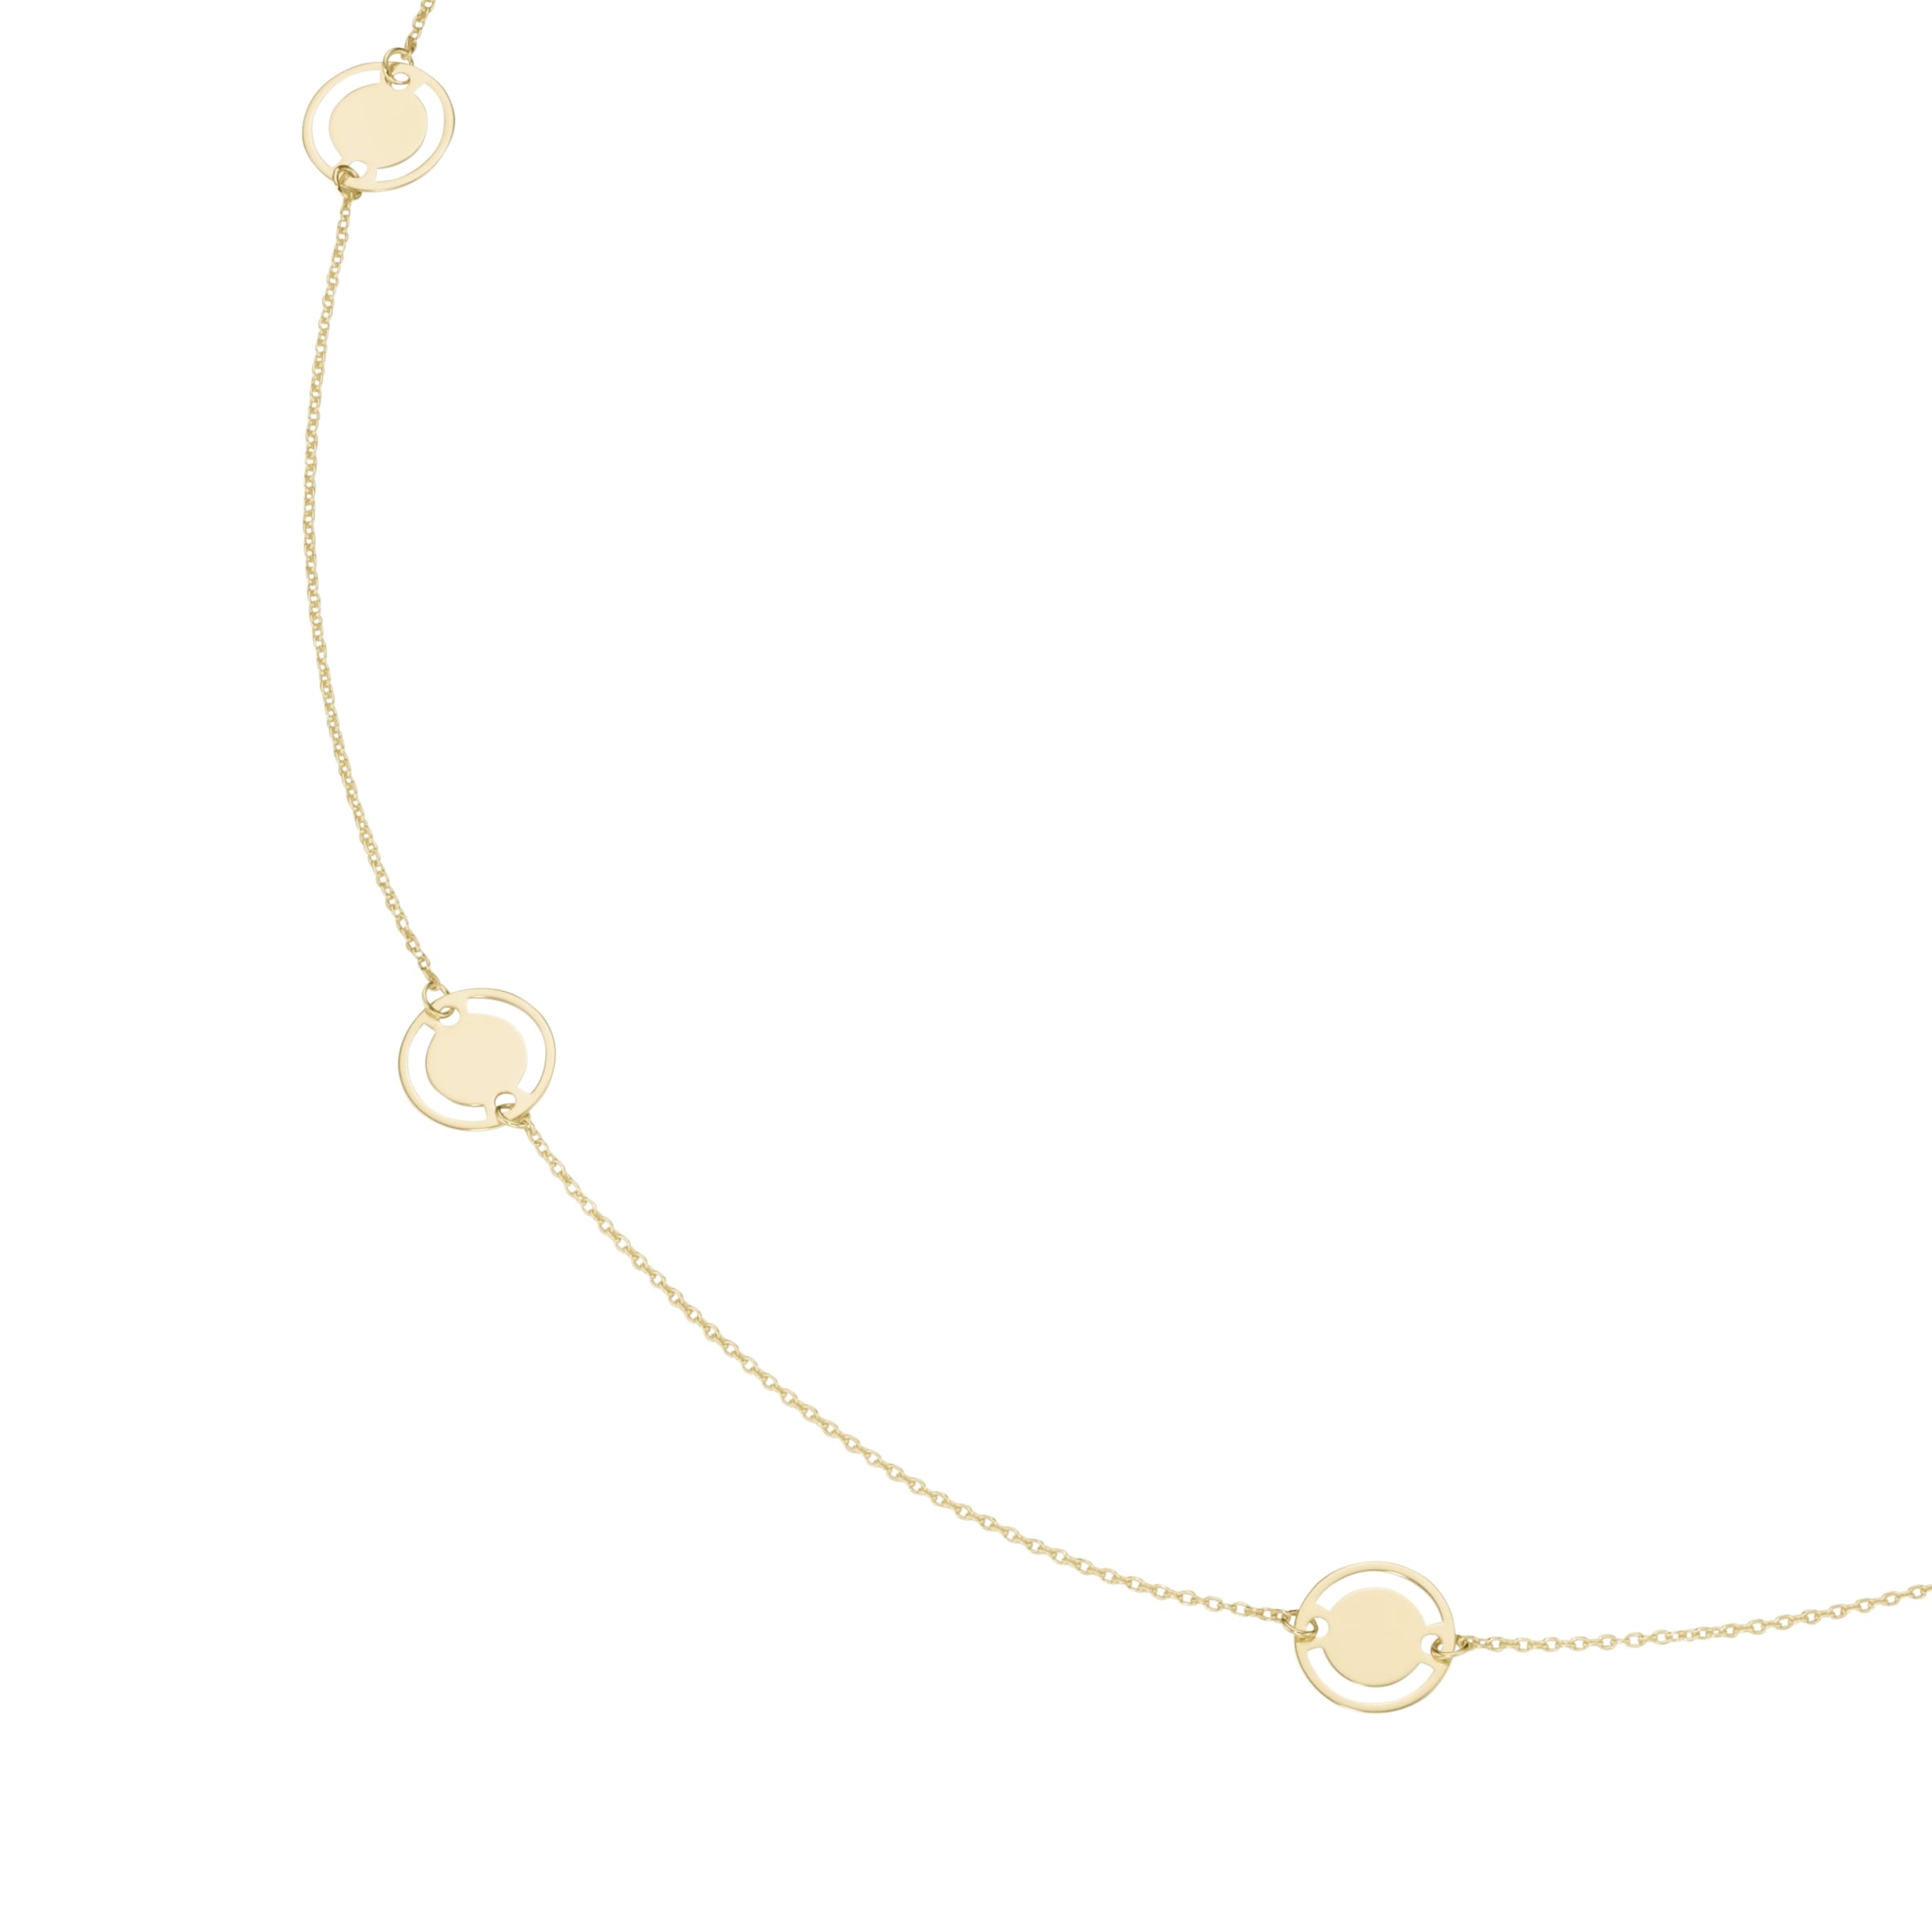 Luigi Merano Goldkette »Collier mit Cut-Out-Muster, Gold 375«